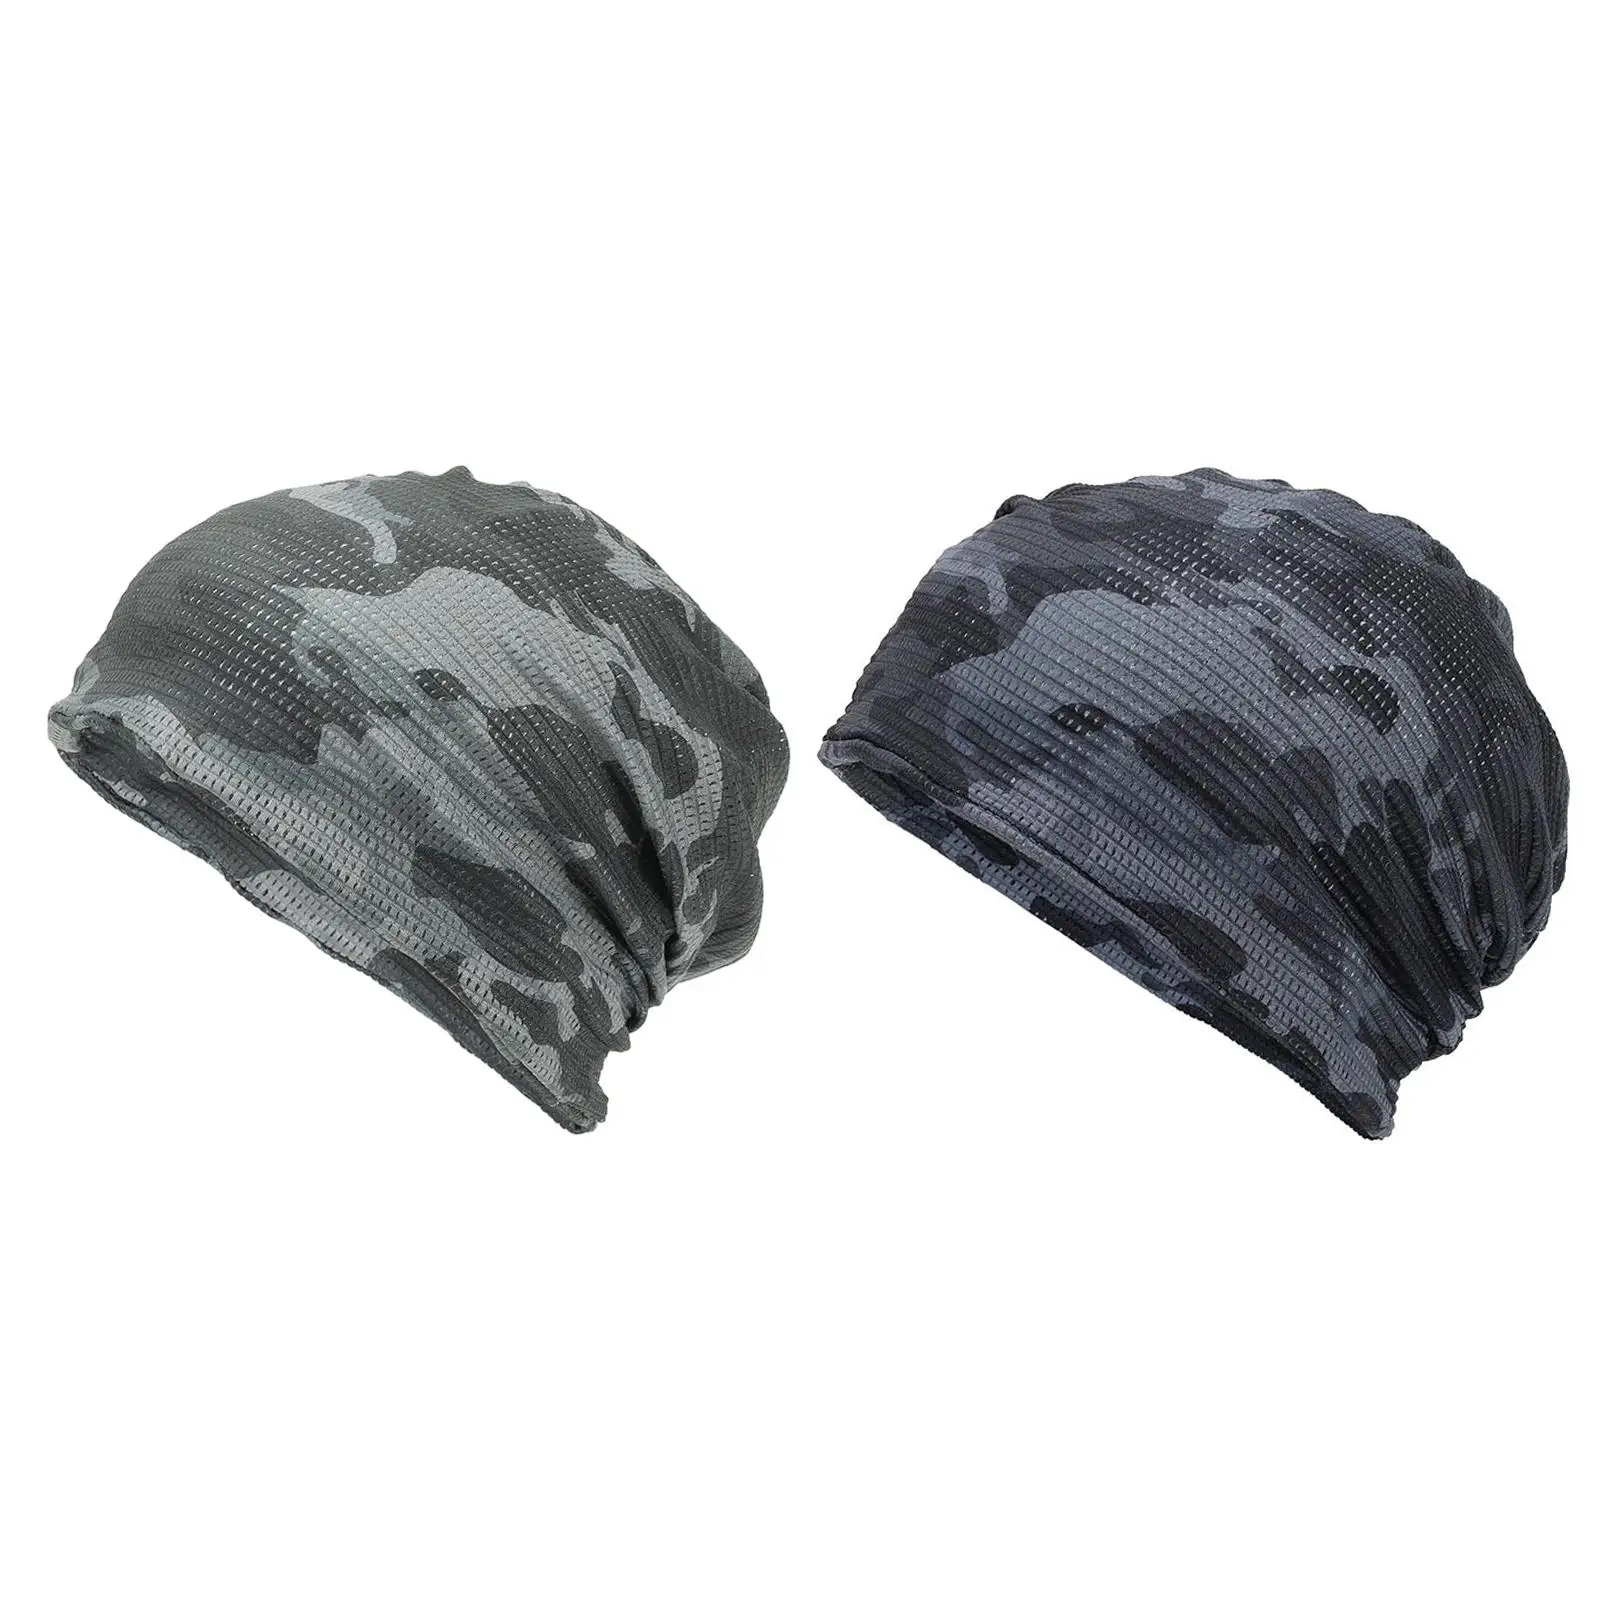 Beanie Caps Slouchy Beanie Summer Adults Breathable Comfortable Skull Hats